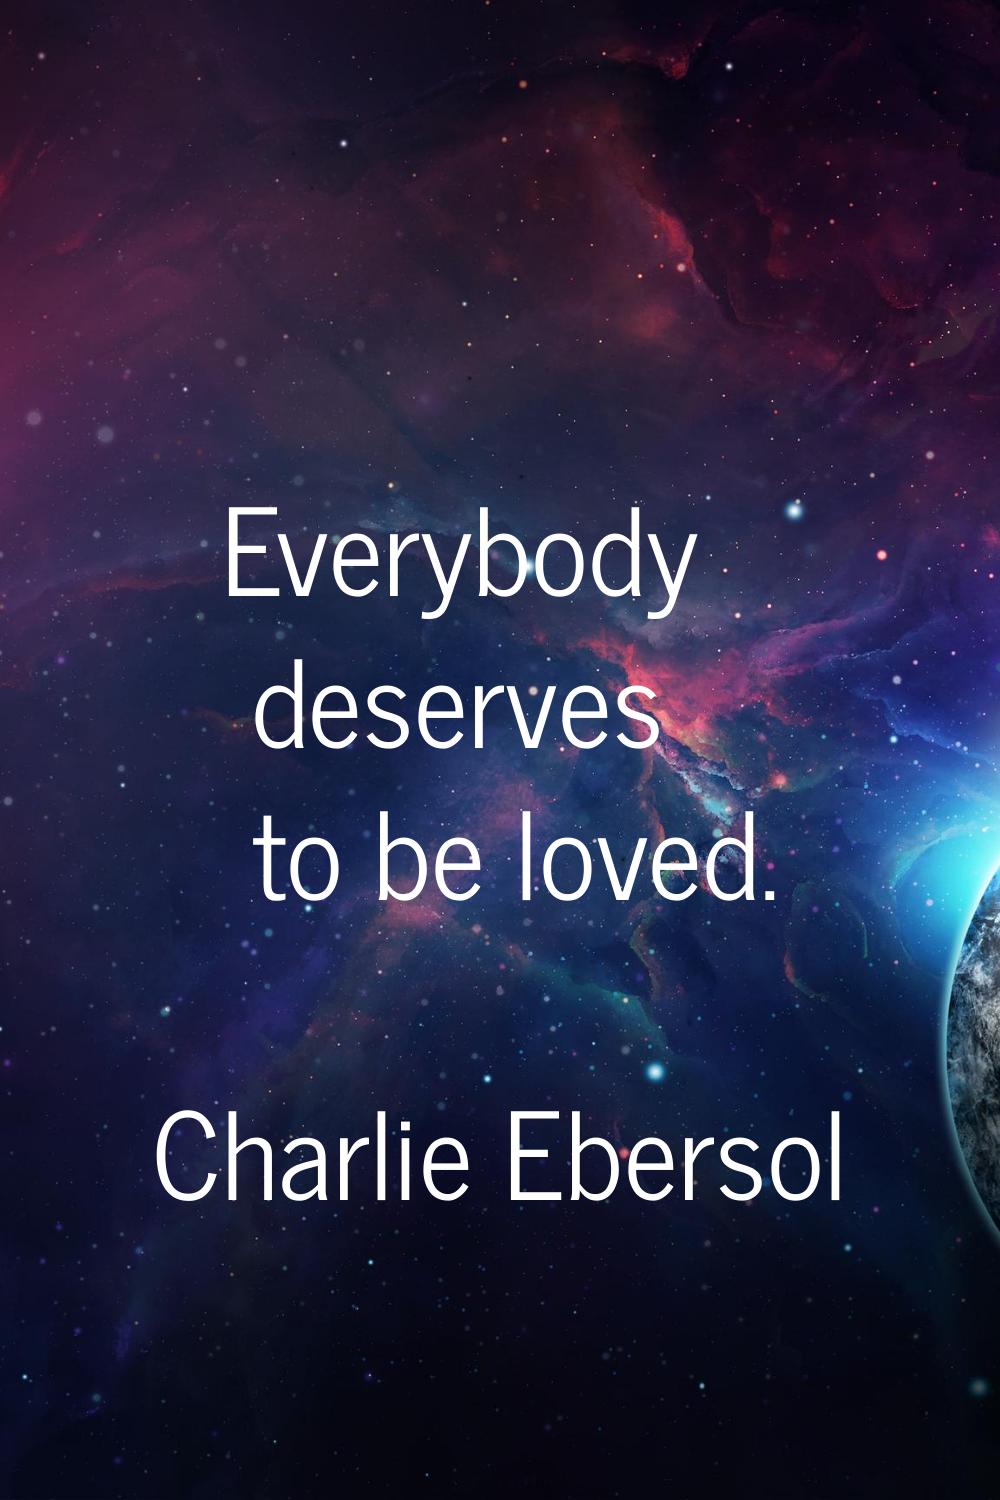 Everybody deserves to be loved.